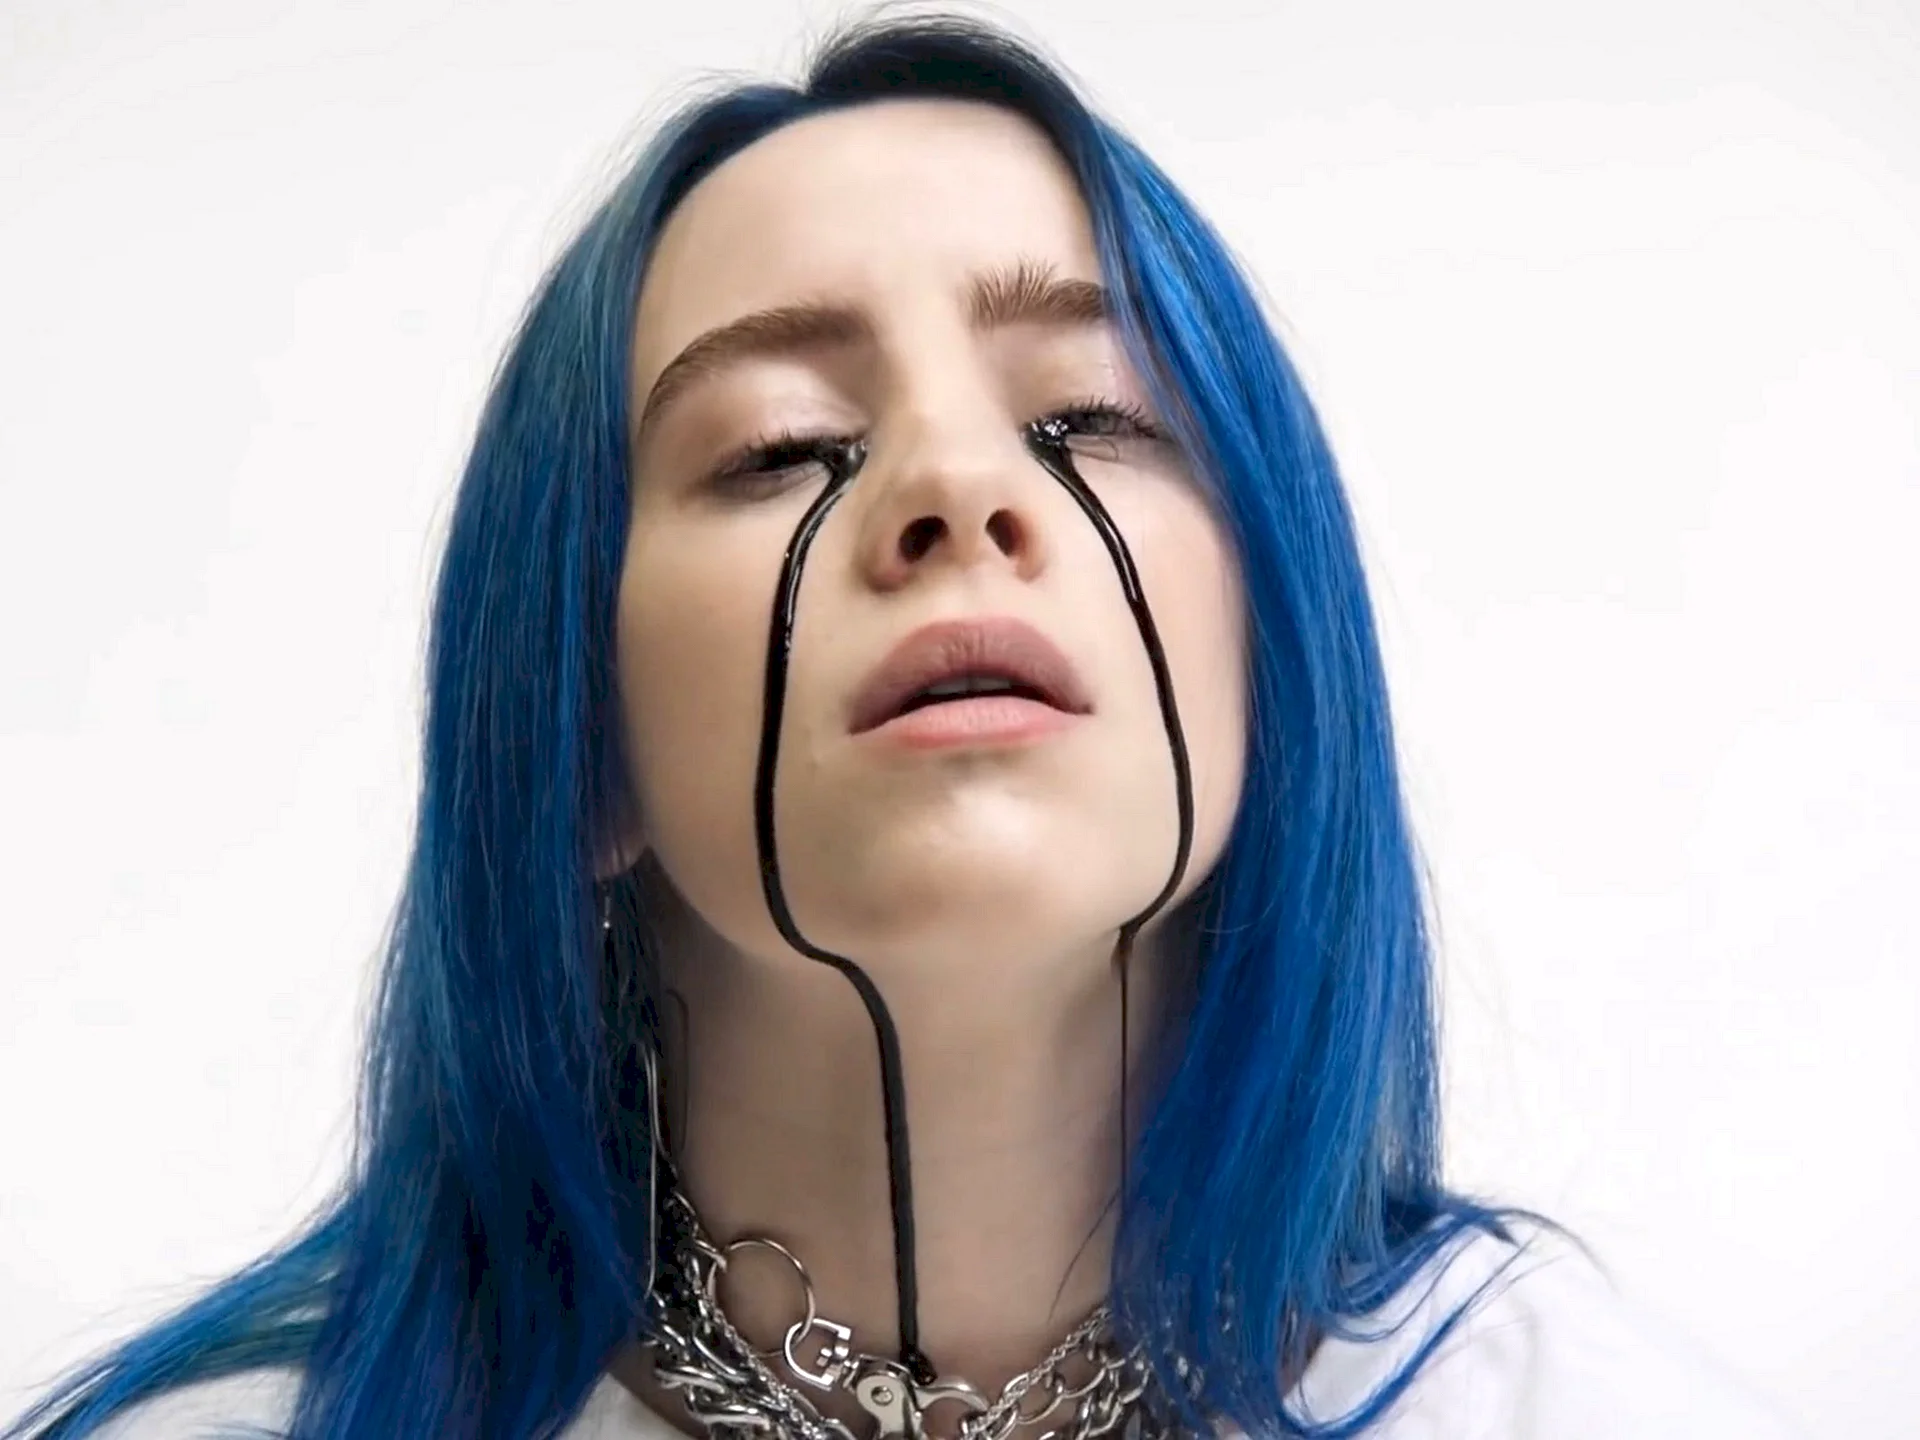 Billie Eilish's blue hair and captivating smile - wide 7